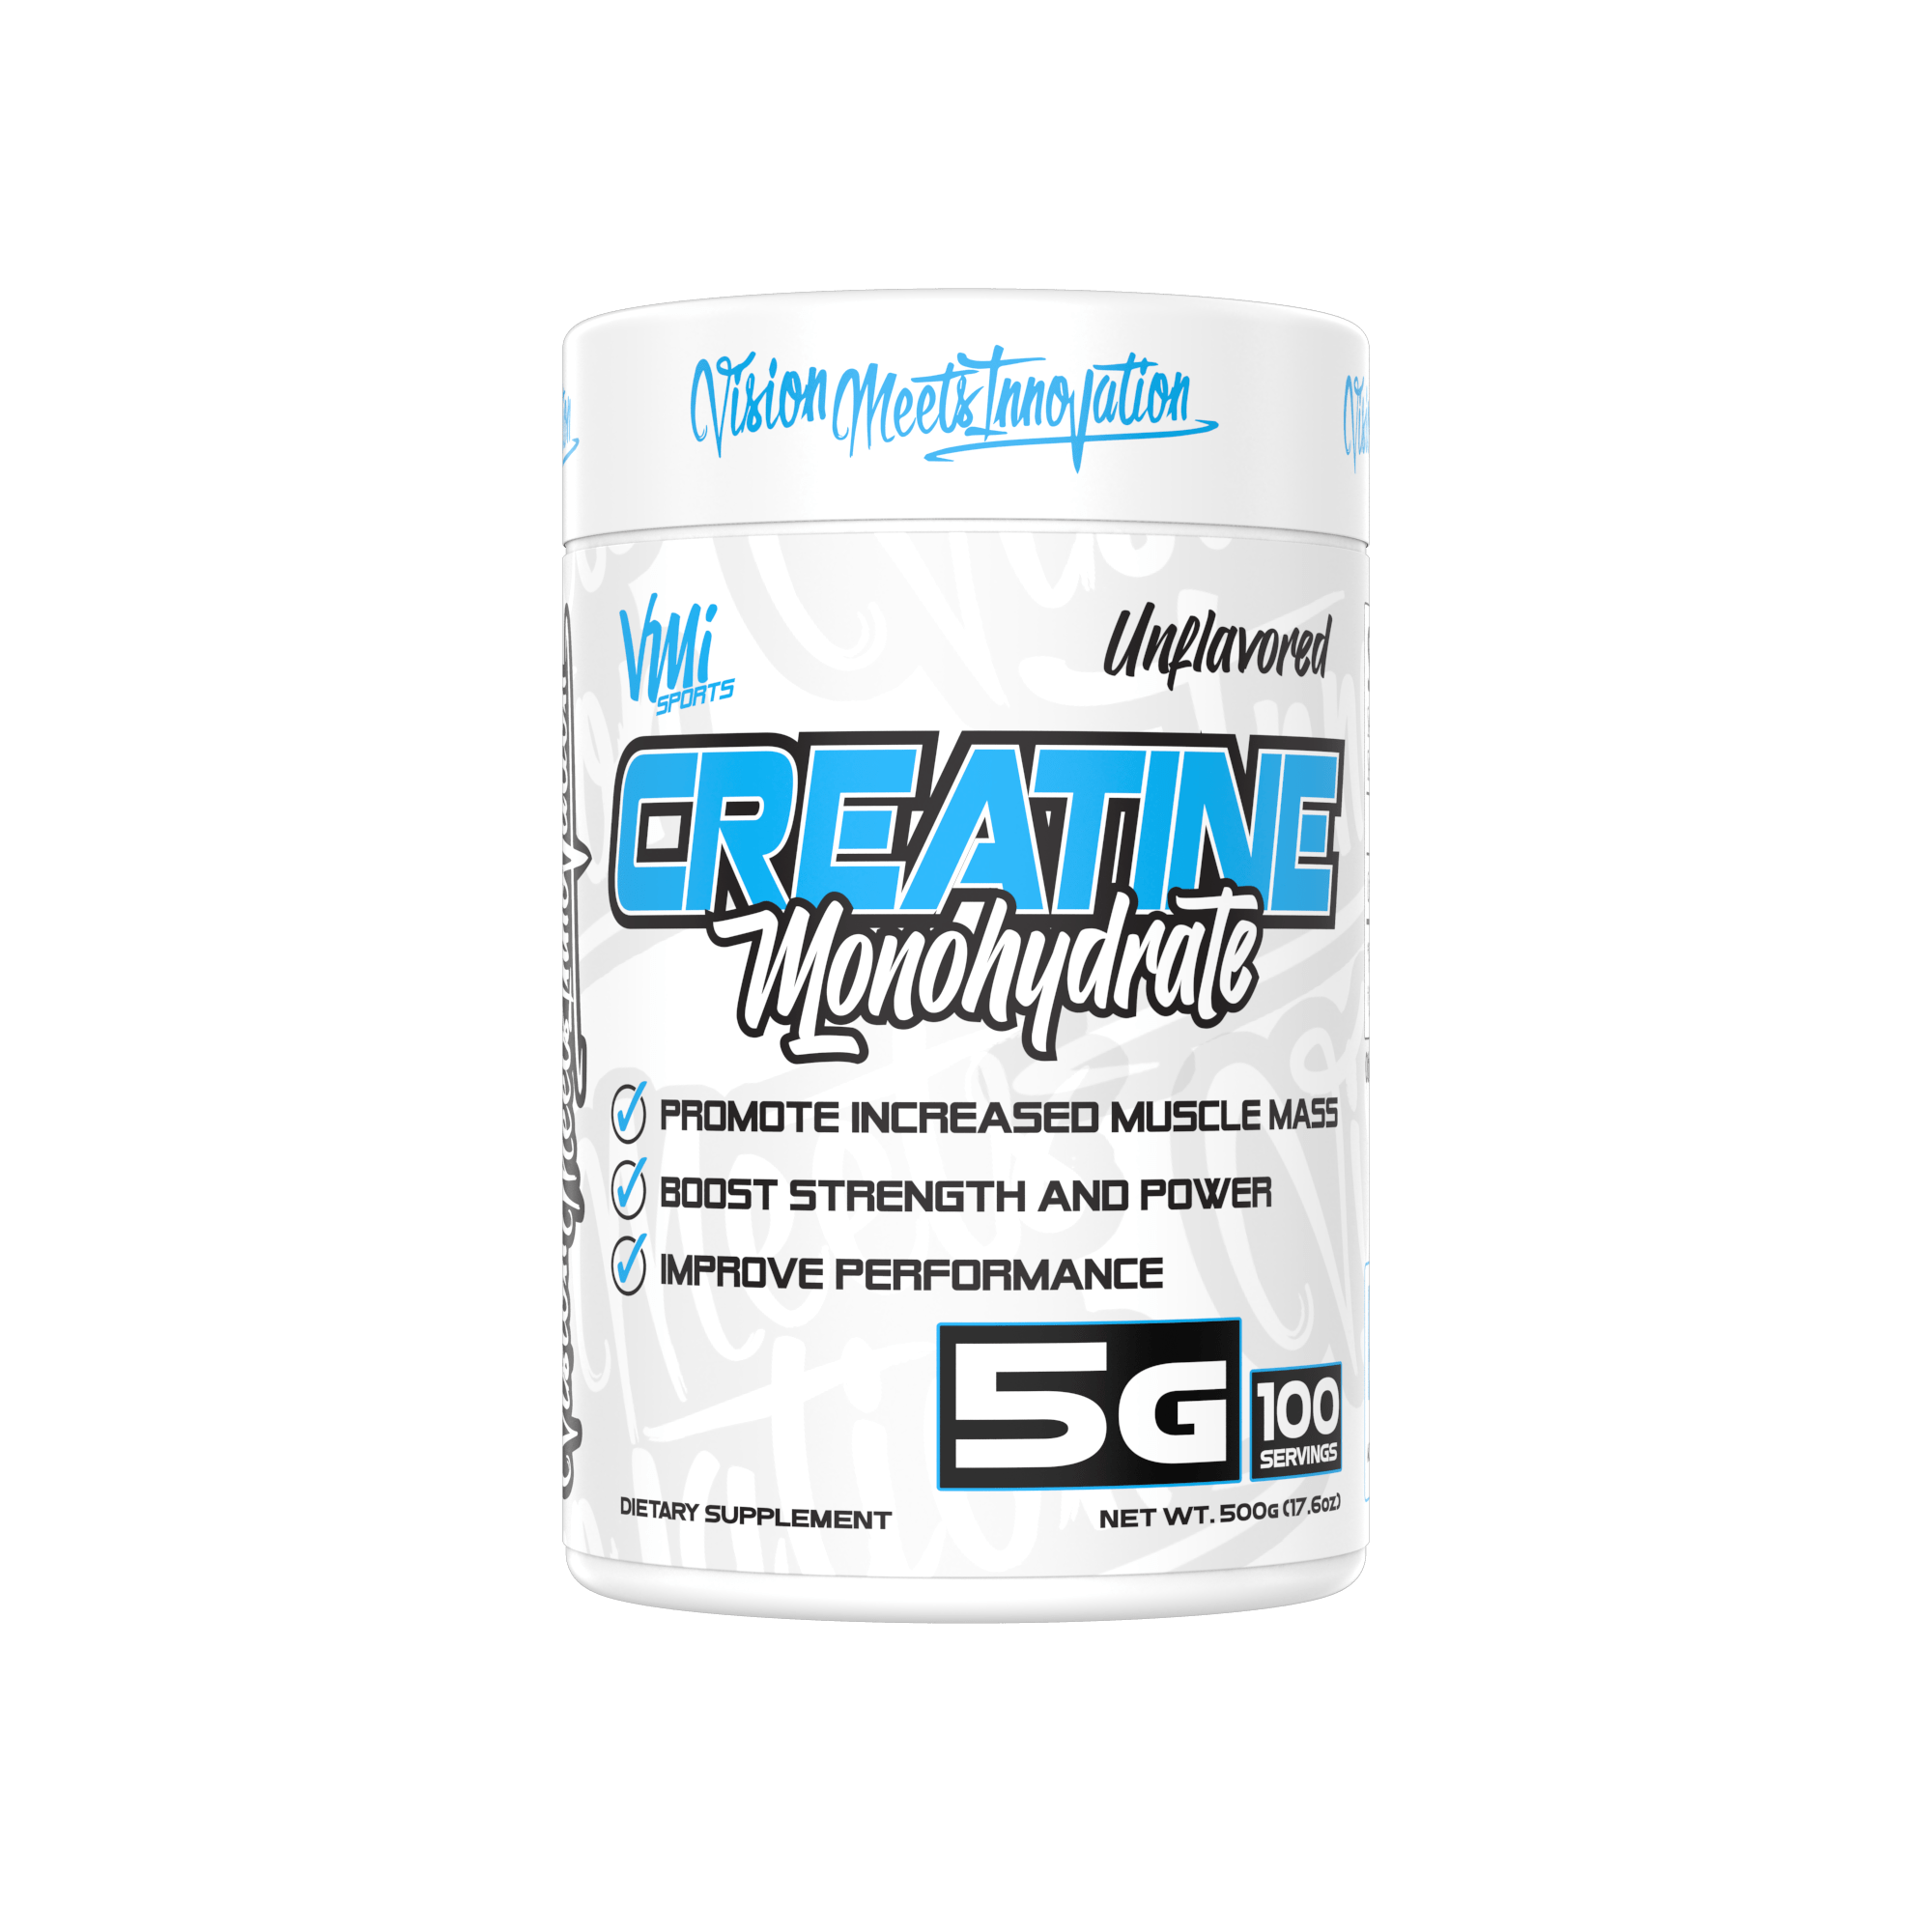 www.vmisports.com Muscle Building & Recovery 500g Creatine Monohydrate